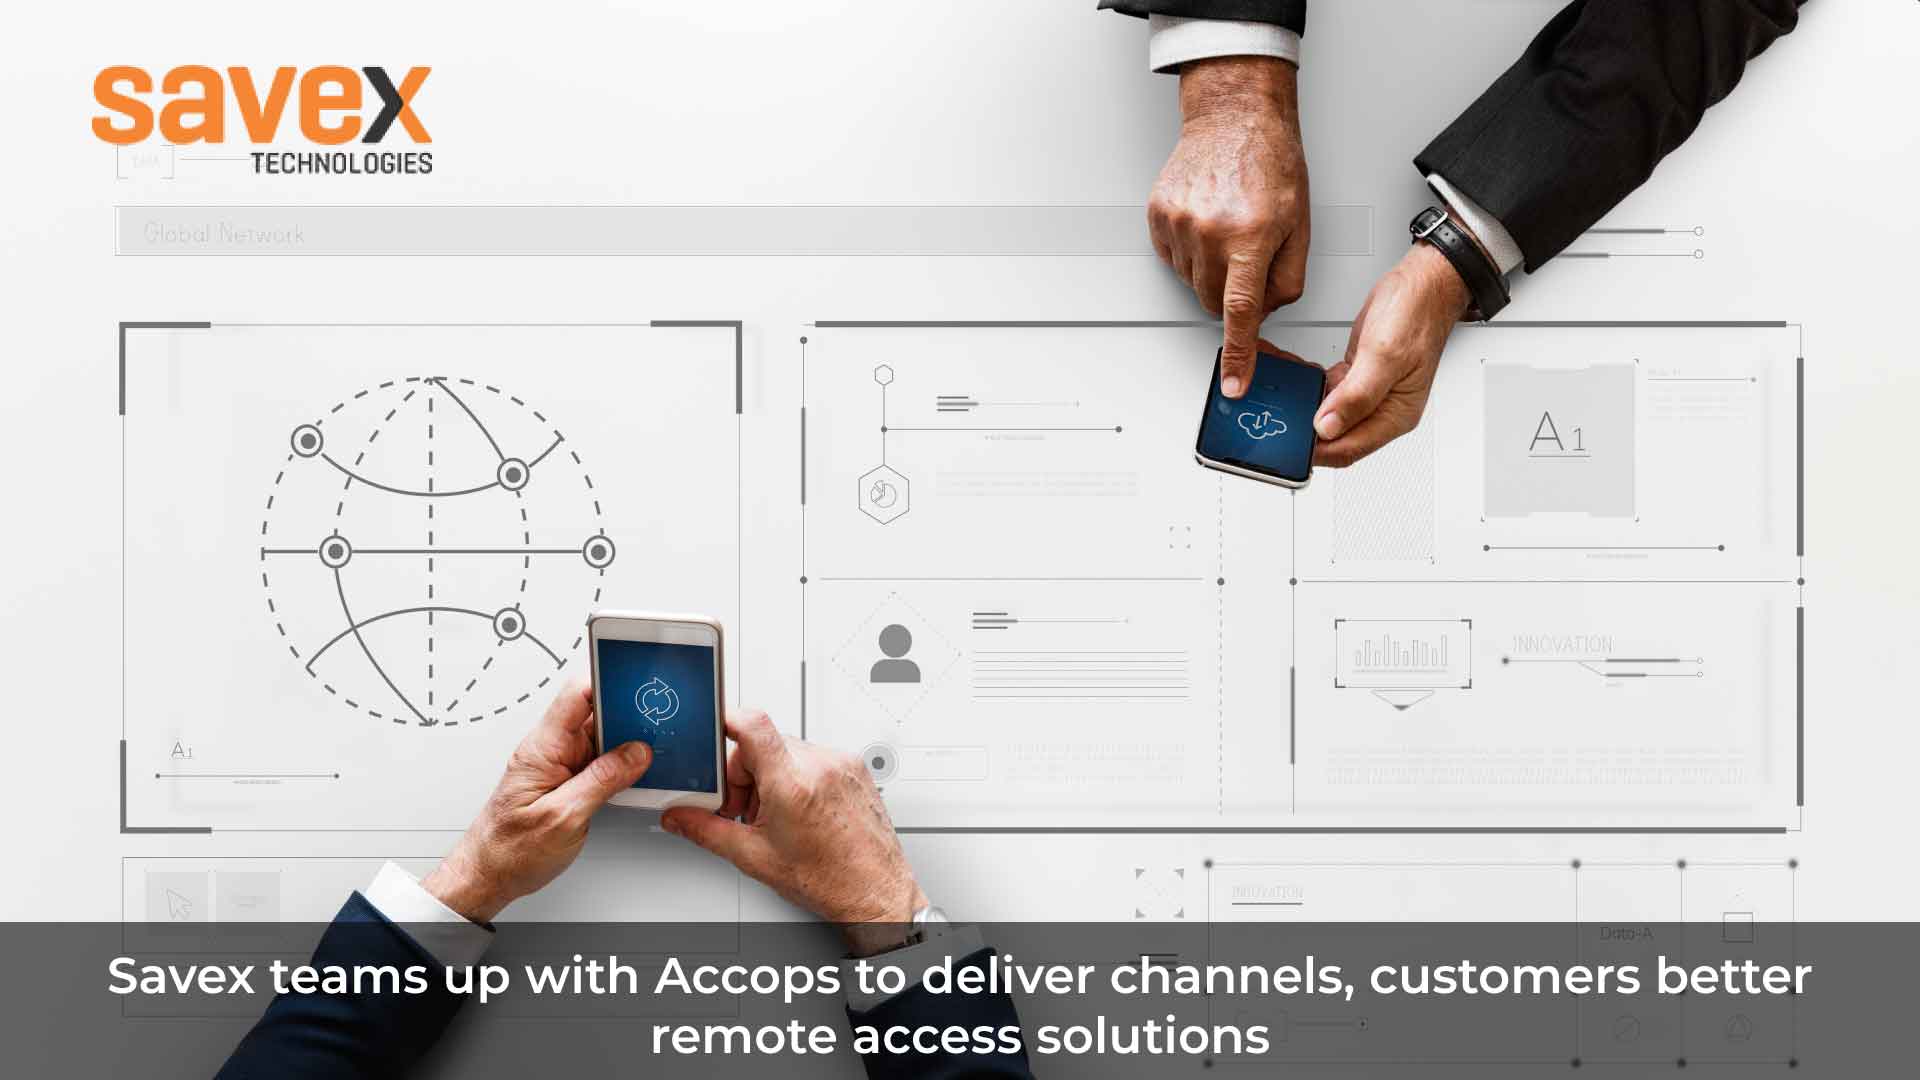 Savex teams up with Accops to deliver channels, customers better remote access solutions